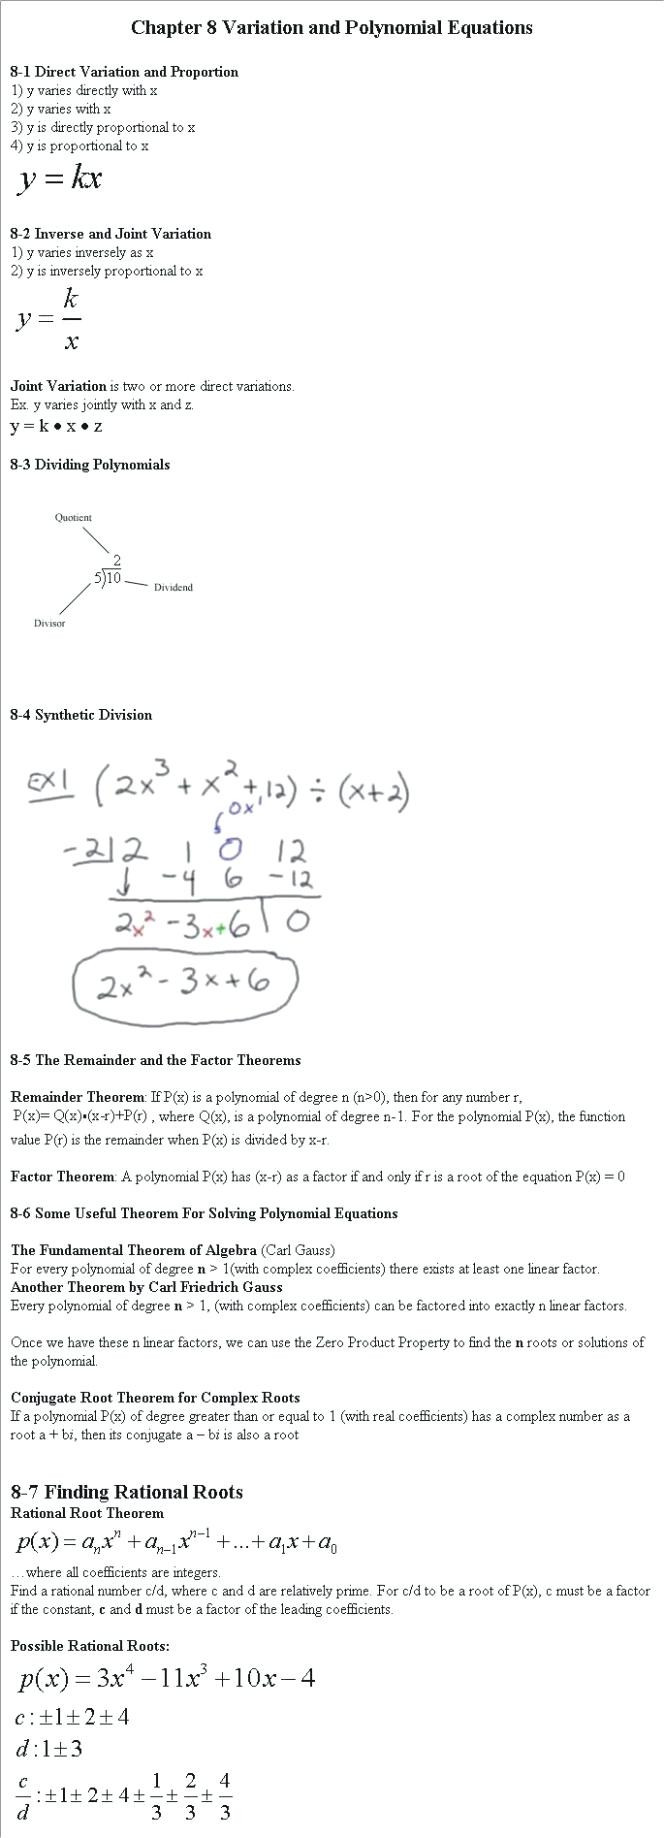 Solving Polynomial Equations Worksheet Answers solving Polynomial Equations Worksheet Answers